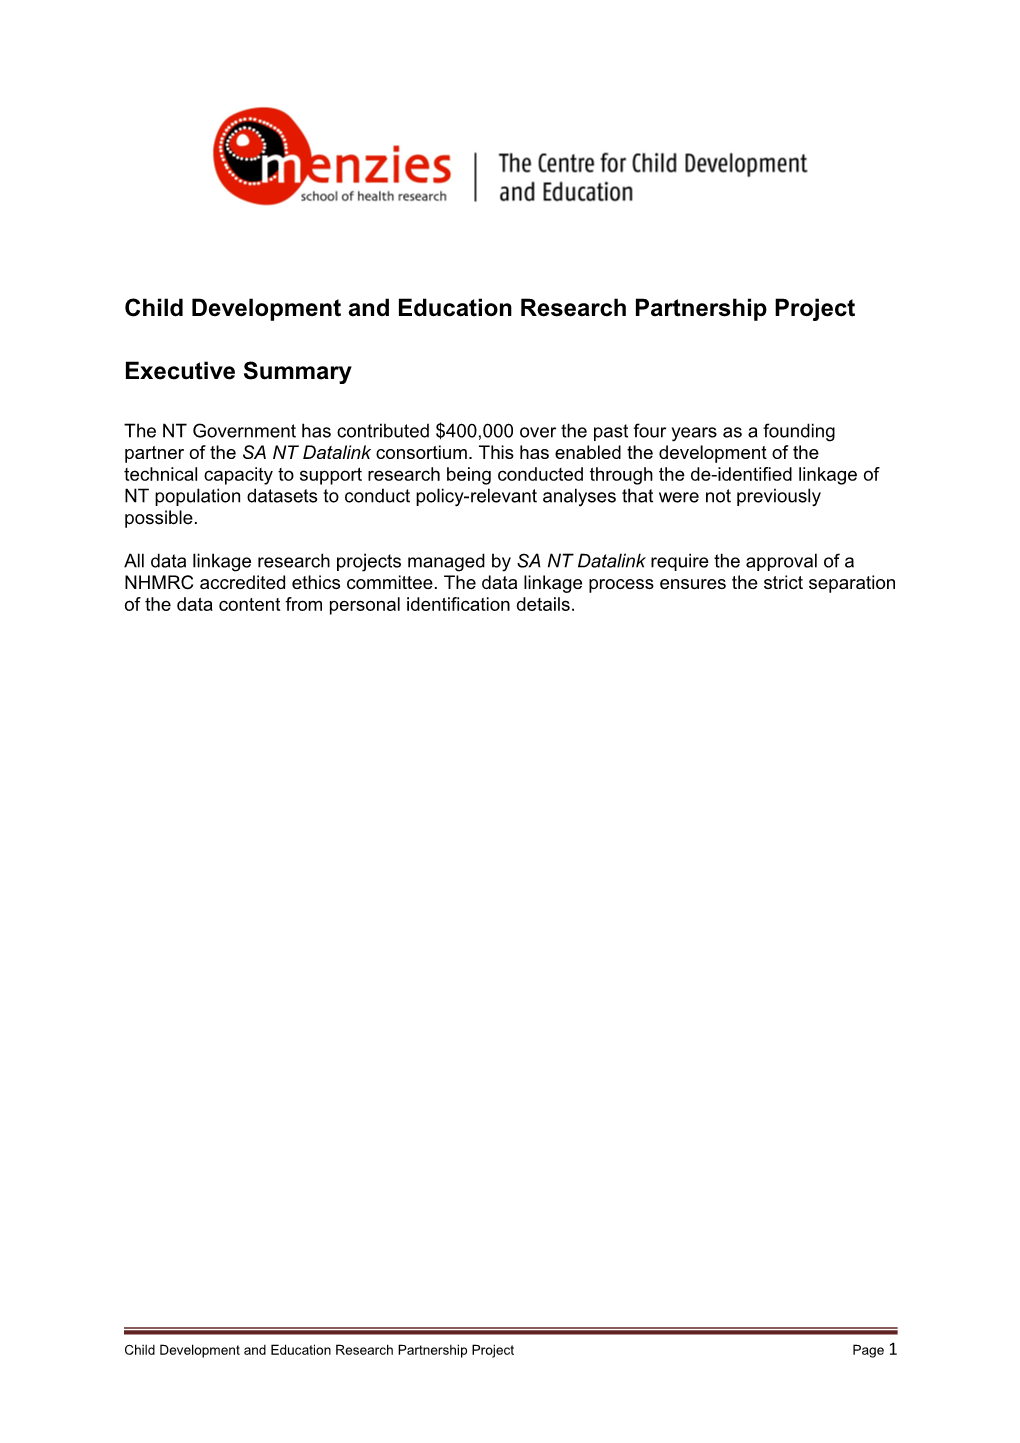 Child Development and Education Research Partnership Project